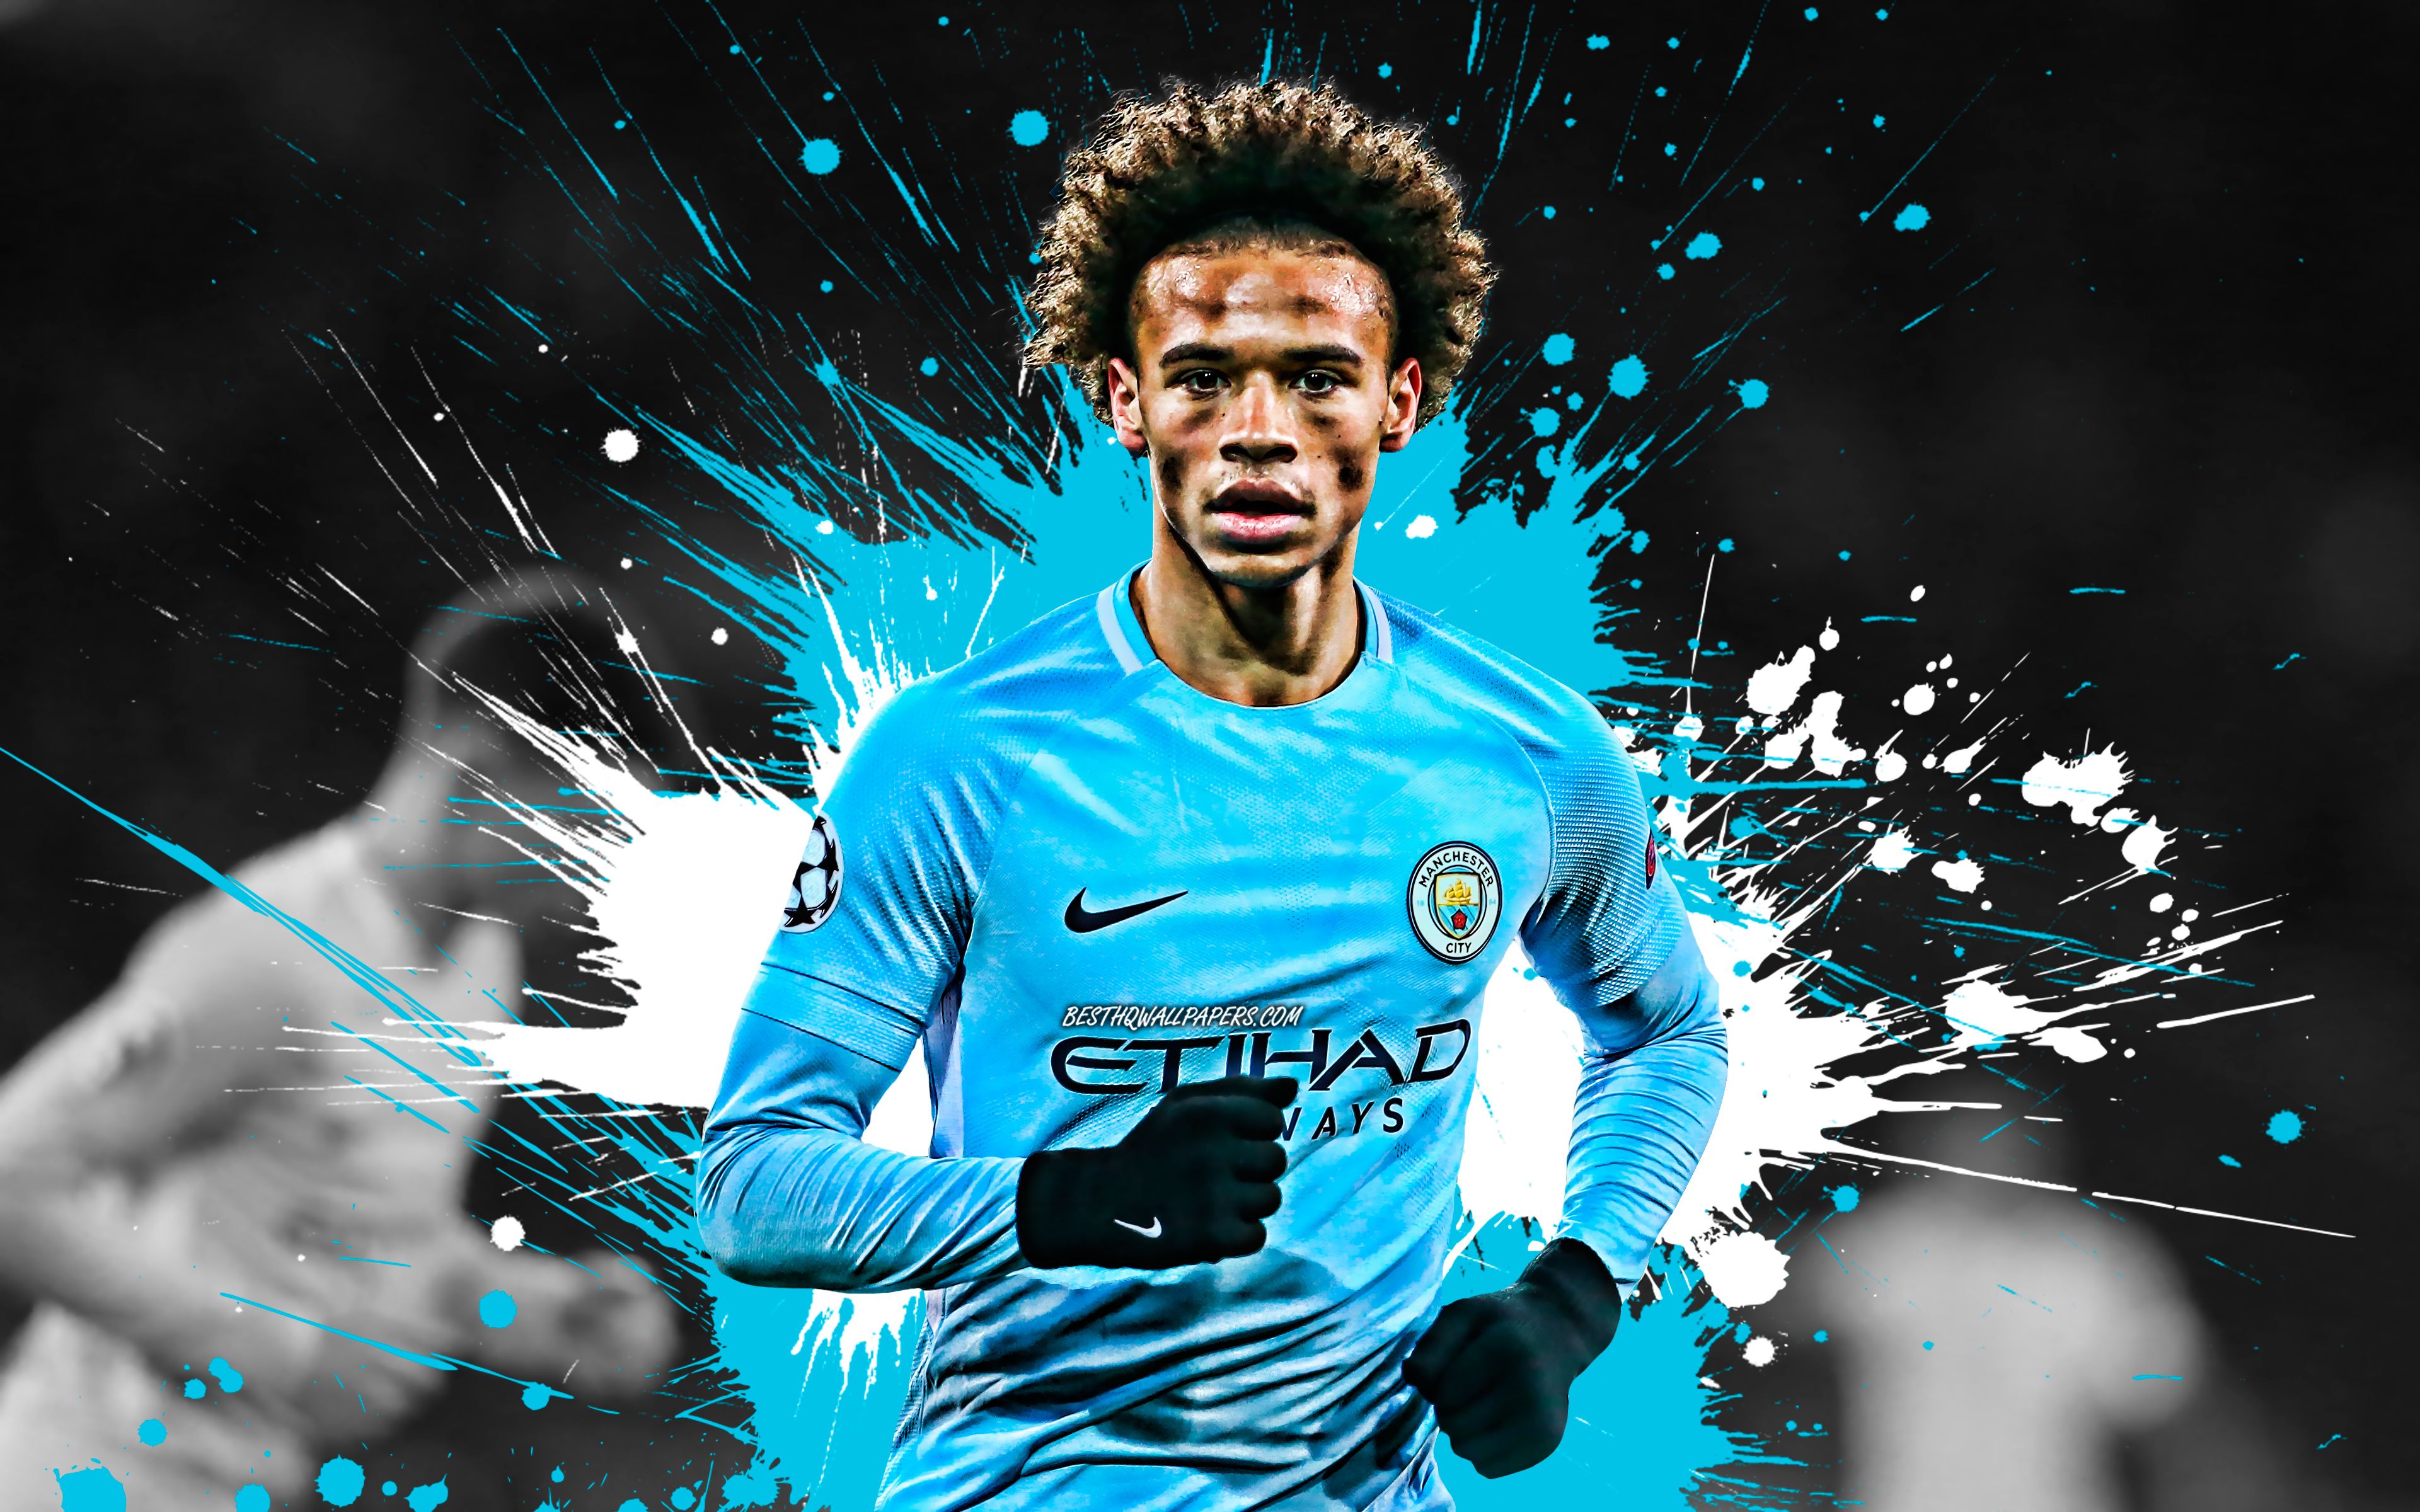 Download wallpaper Leroy Sane, 4k, blue and white blots, german footballers, Manchester City FC, soccer, Sane, midfielder, Premier League, Man City, footballers, grunge for desktop with resolution 3840x2400. High Quality HD picture